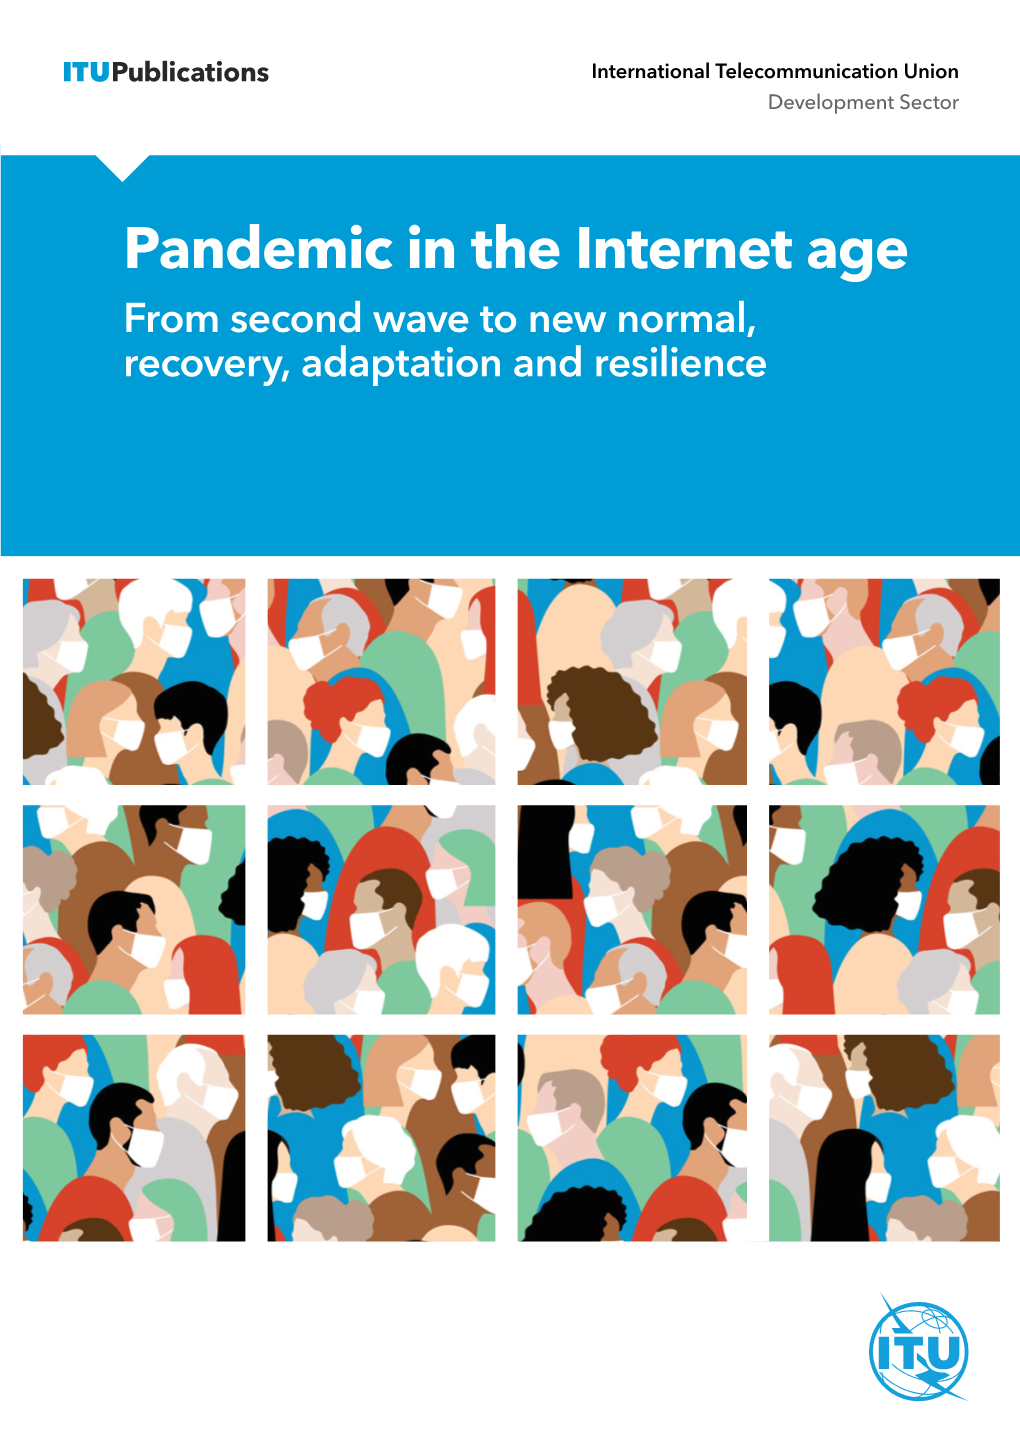 Pandemic in the Internet Age from Second Wave to New Normal, Recovery, Adaptation and Resilience